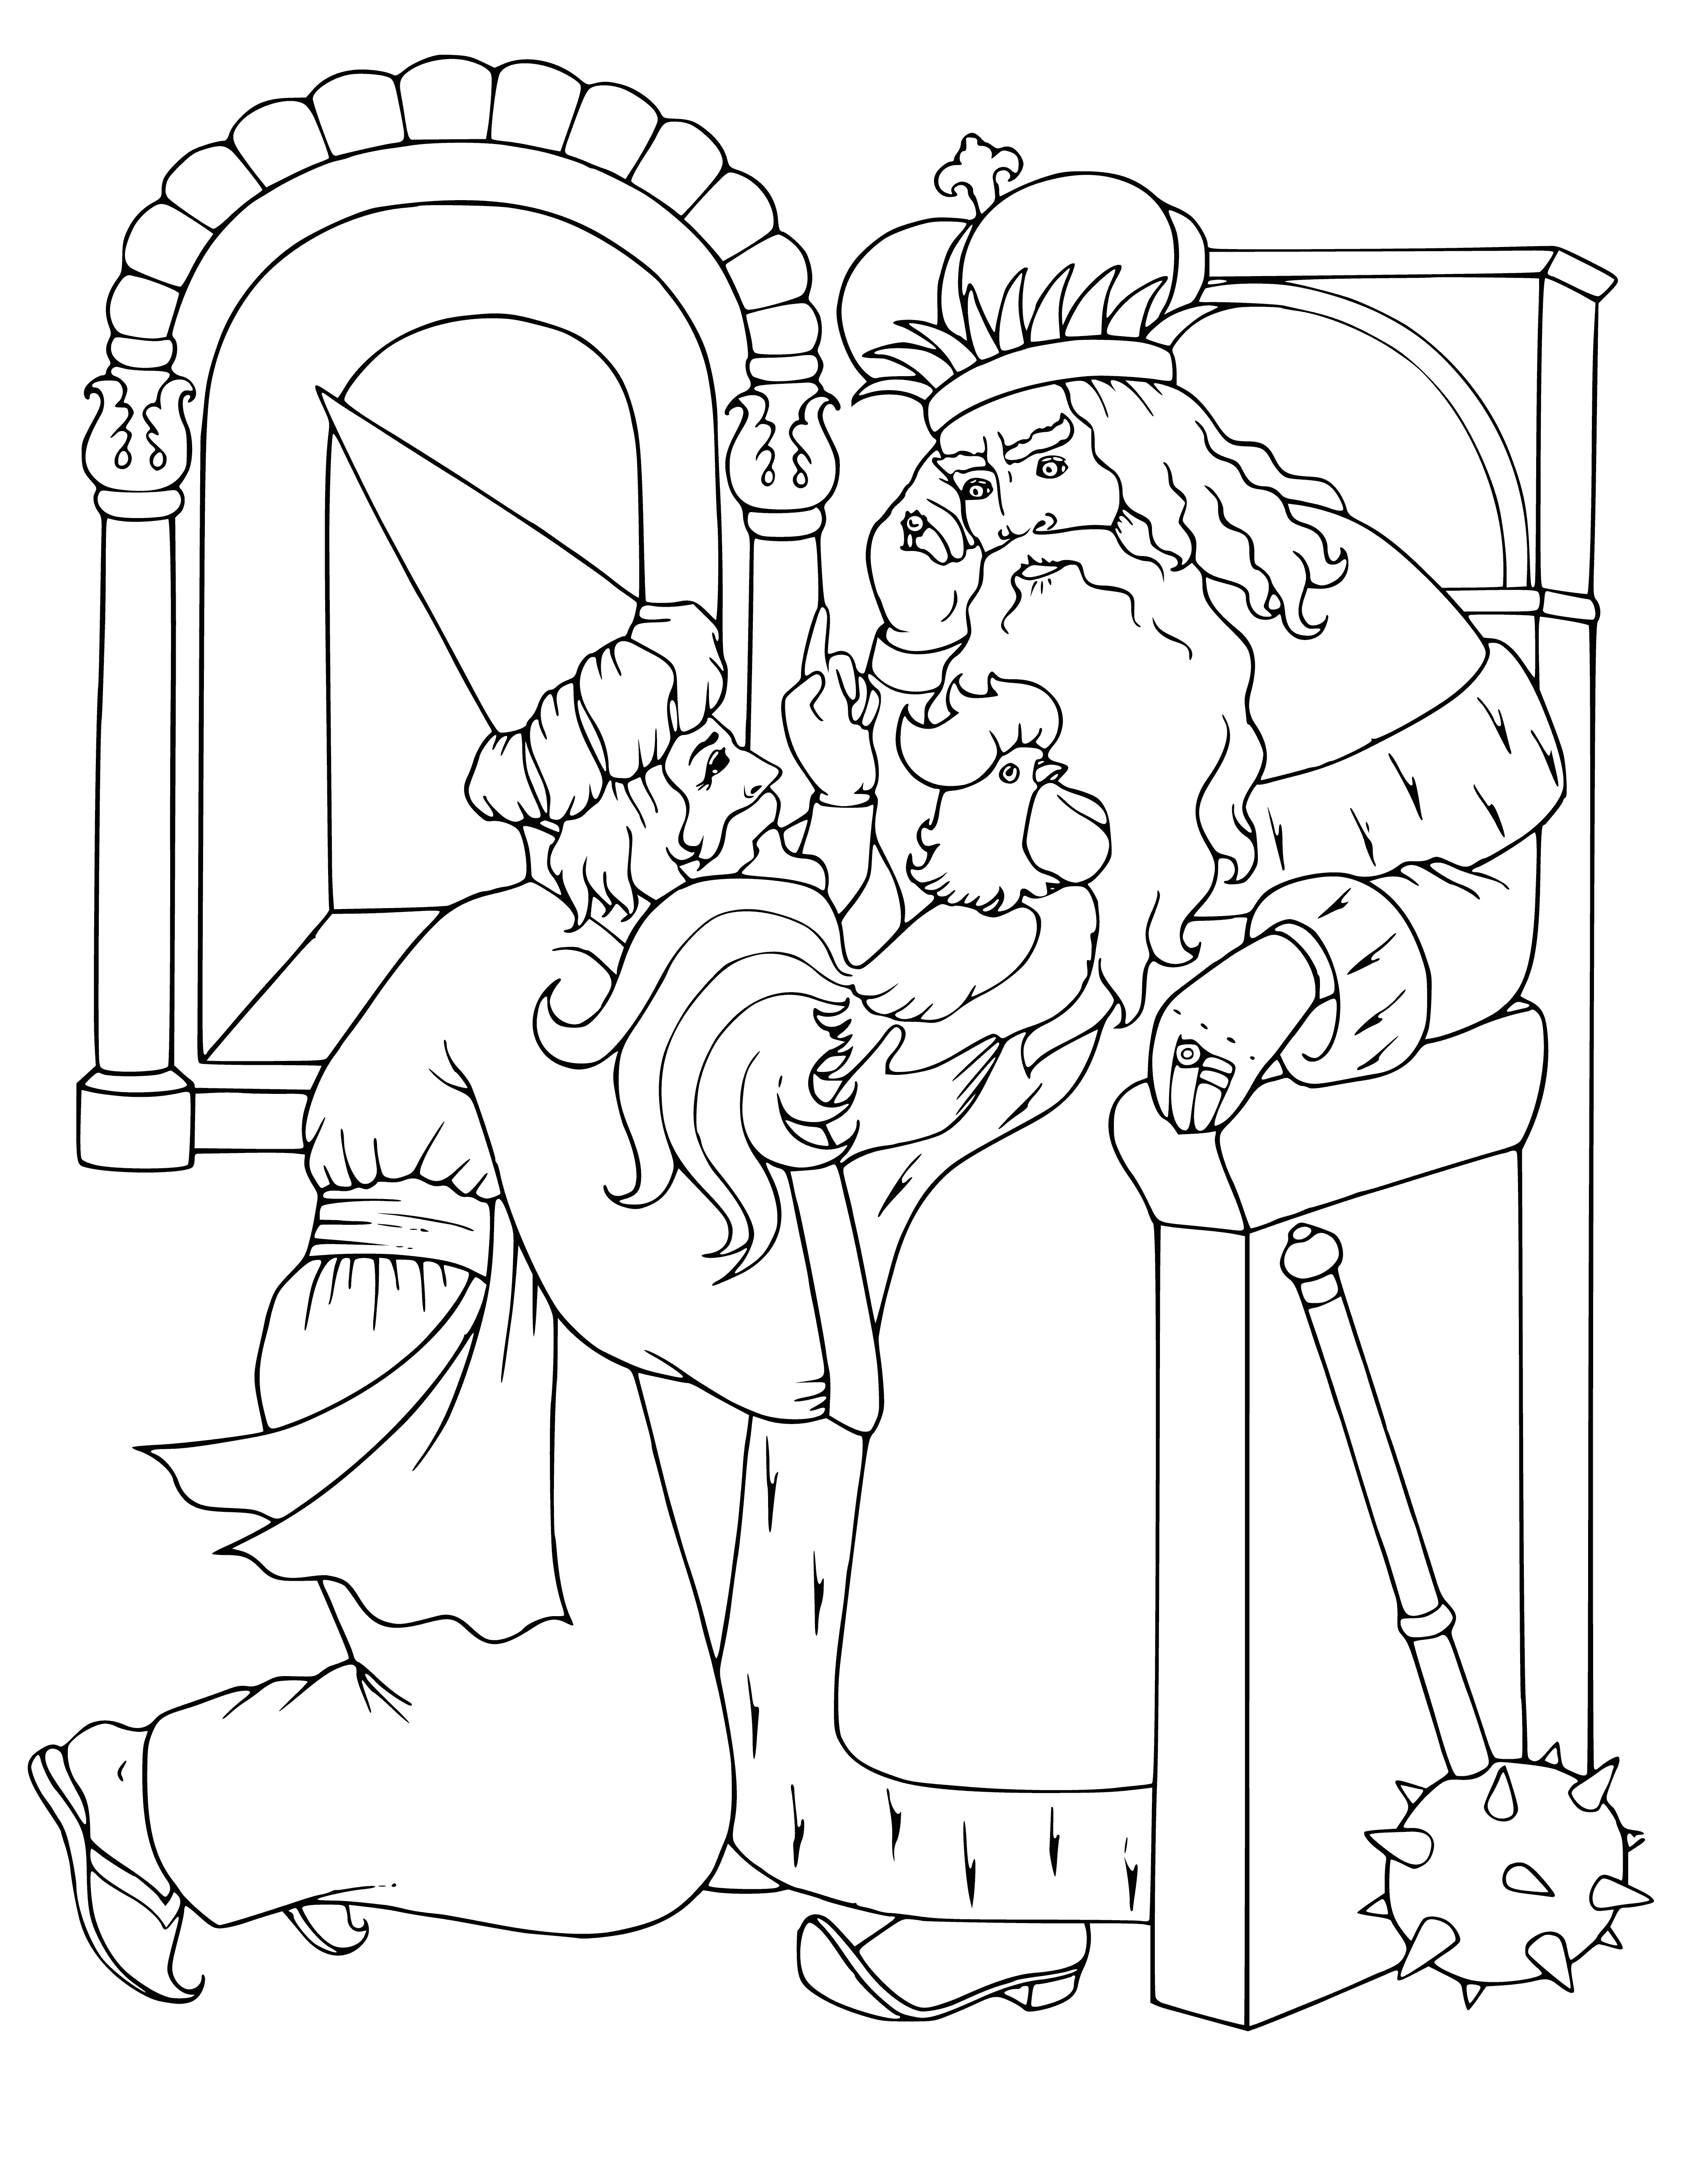 coloring page: Astrologer gives King Dadon golden cockerel; King sits on throne with crown & sceptre, wearing red robe & fire burning behind them.